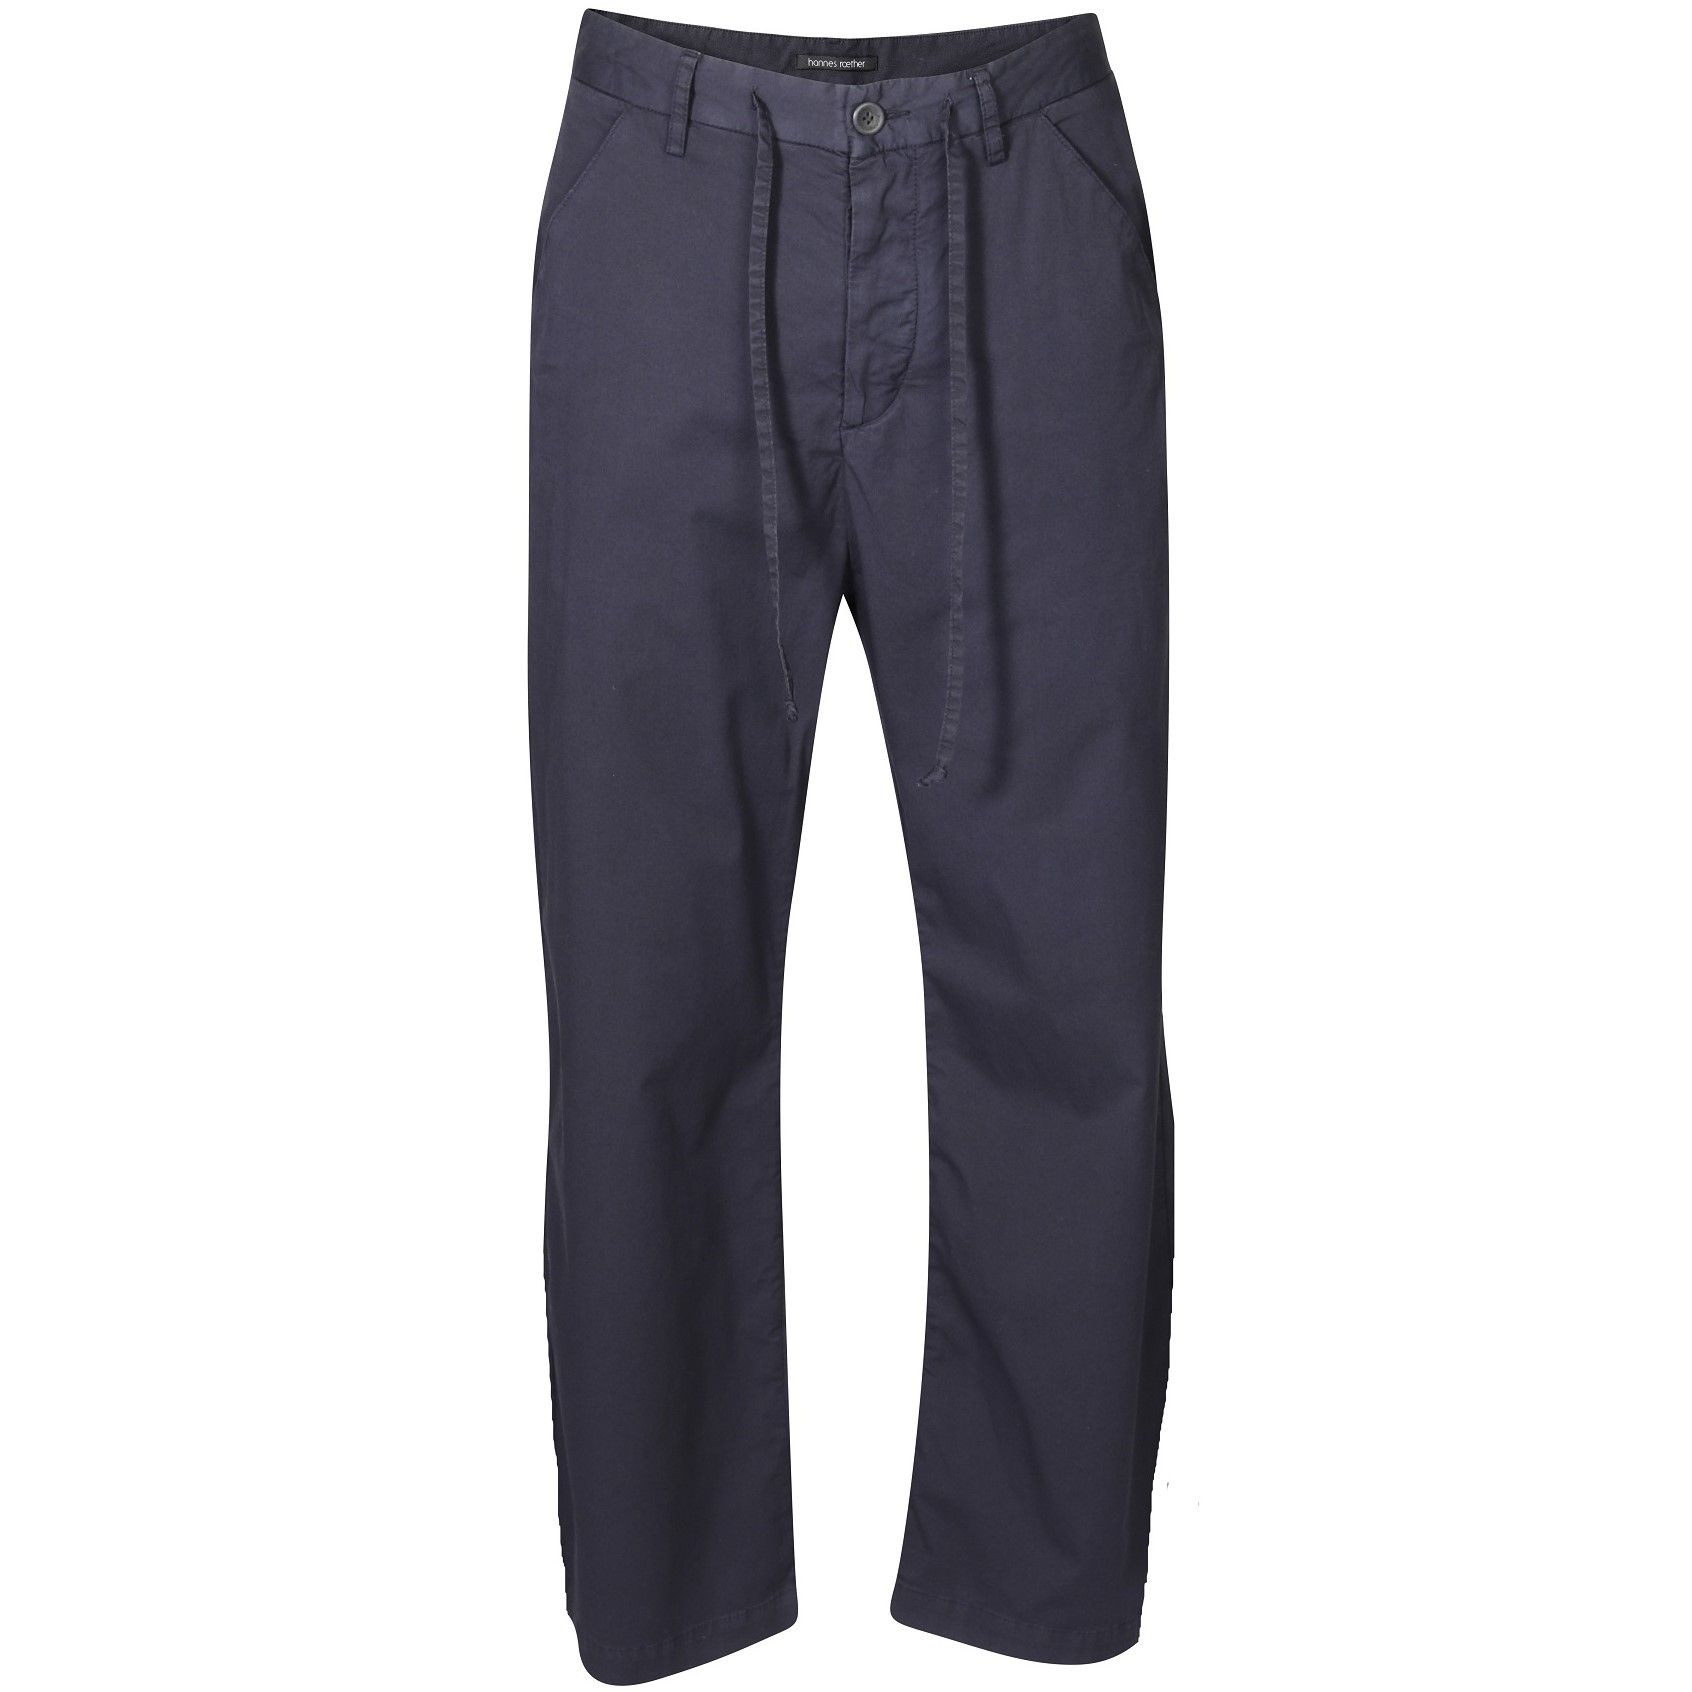 HANNES ROETHER Cotton Pant in Tornado M